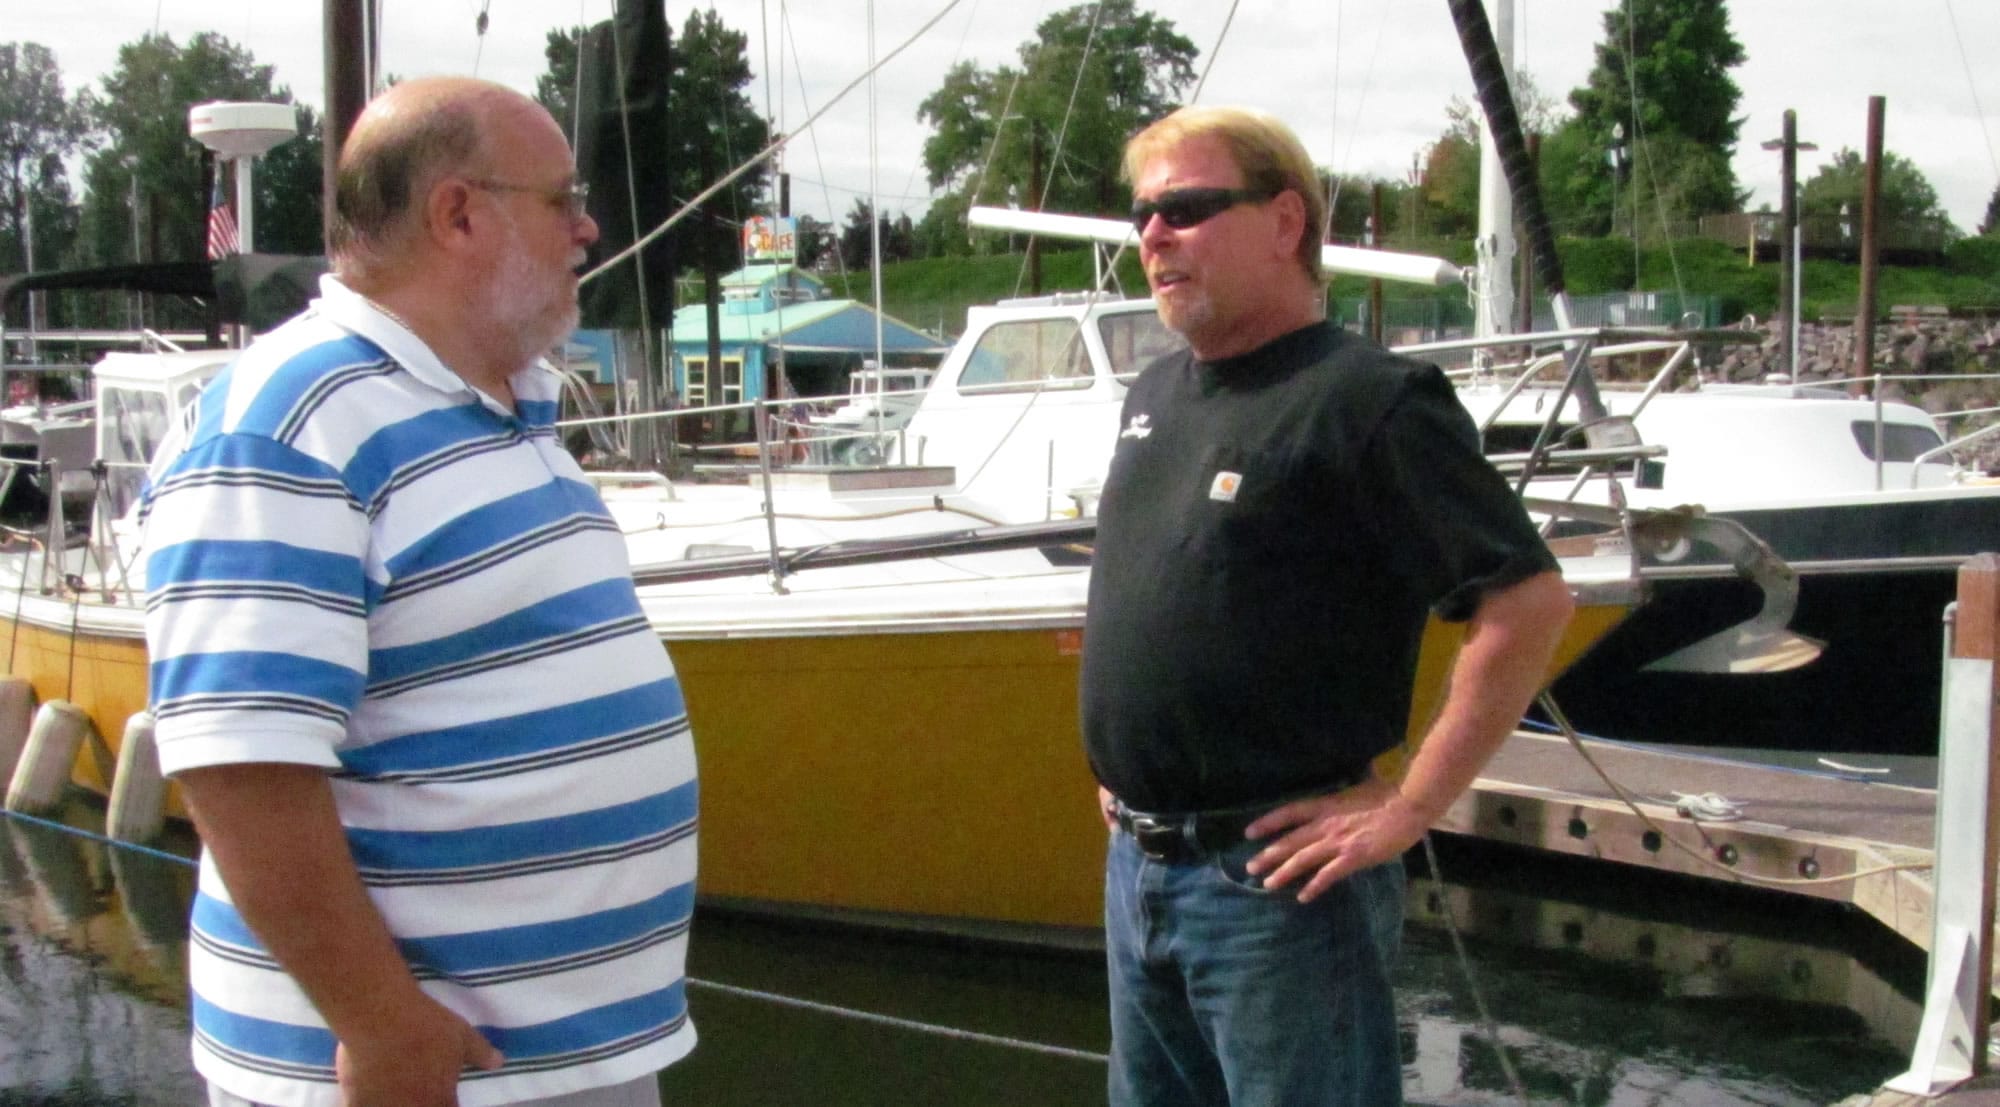 Mark Hamrick, Port of Camas-Washougal harbormaster (right) chats with Tom Welinski, of Camas (left), at the port marina. In August, Hamrick provided transportation and assistance when Welinski pulled a muscle in his back while sailboating. Hamrick said every day brings a new challenge. &quot;You never really know what's going to happen when you go to work or when you're not there for that matter,&quot; he said. &quot;Your phone can ring at any time for almost anything. It can get exciting at times, or go for days or weeks without an event.&quot; Hamrick was hired by the port in 2005, in the role of maintenance assistant.